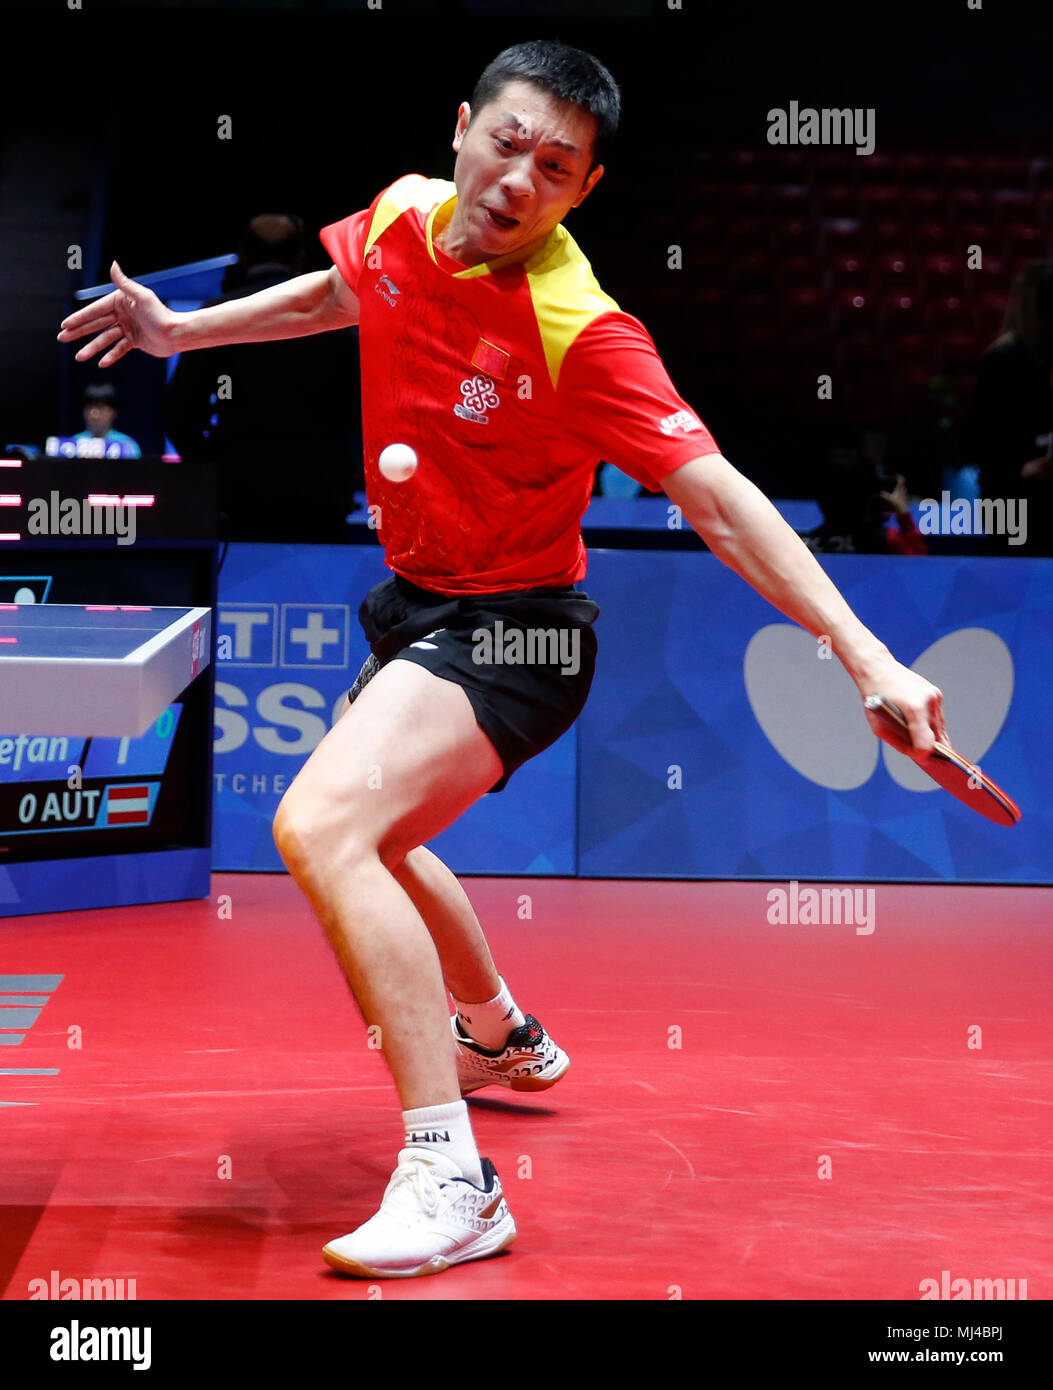 Halmstad, Sweden. 4th May, 2018. Xu Xin of China returns to Stefan Fegerl of Austria during the Men's group quarterfinal match at the 2018 World Team Table Tennis Championships in Halmstad, Sweden, May 4, 2018. Xu won the game with 3-0, and team China won the match with 3-0. Credit: Ye Pingfan/Xinhua/Alamy Live News Stock Photo